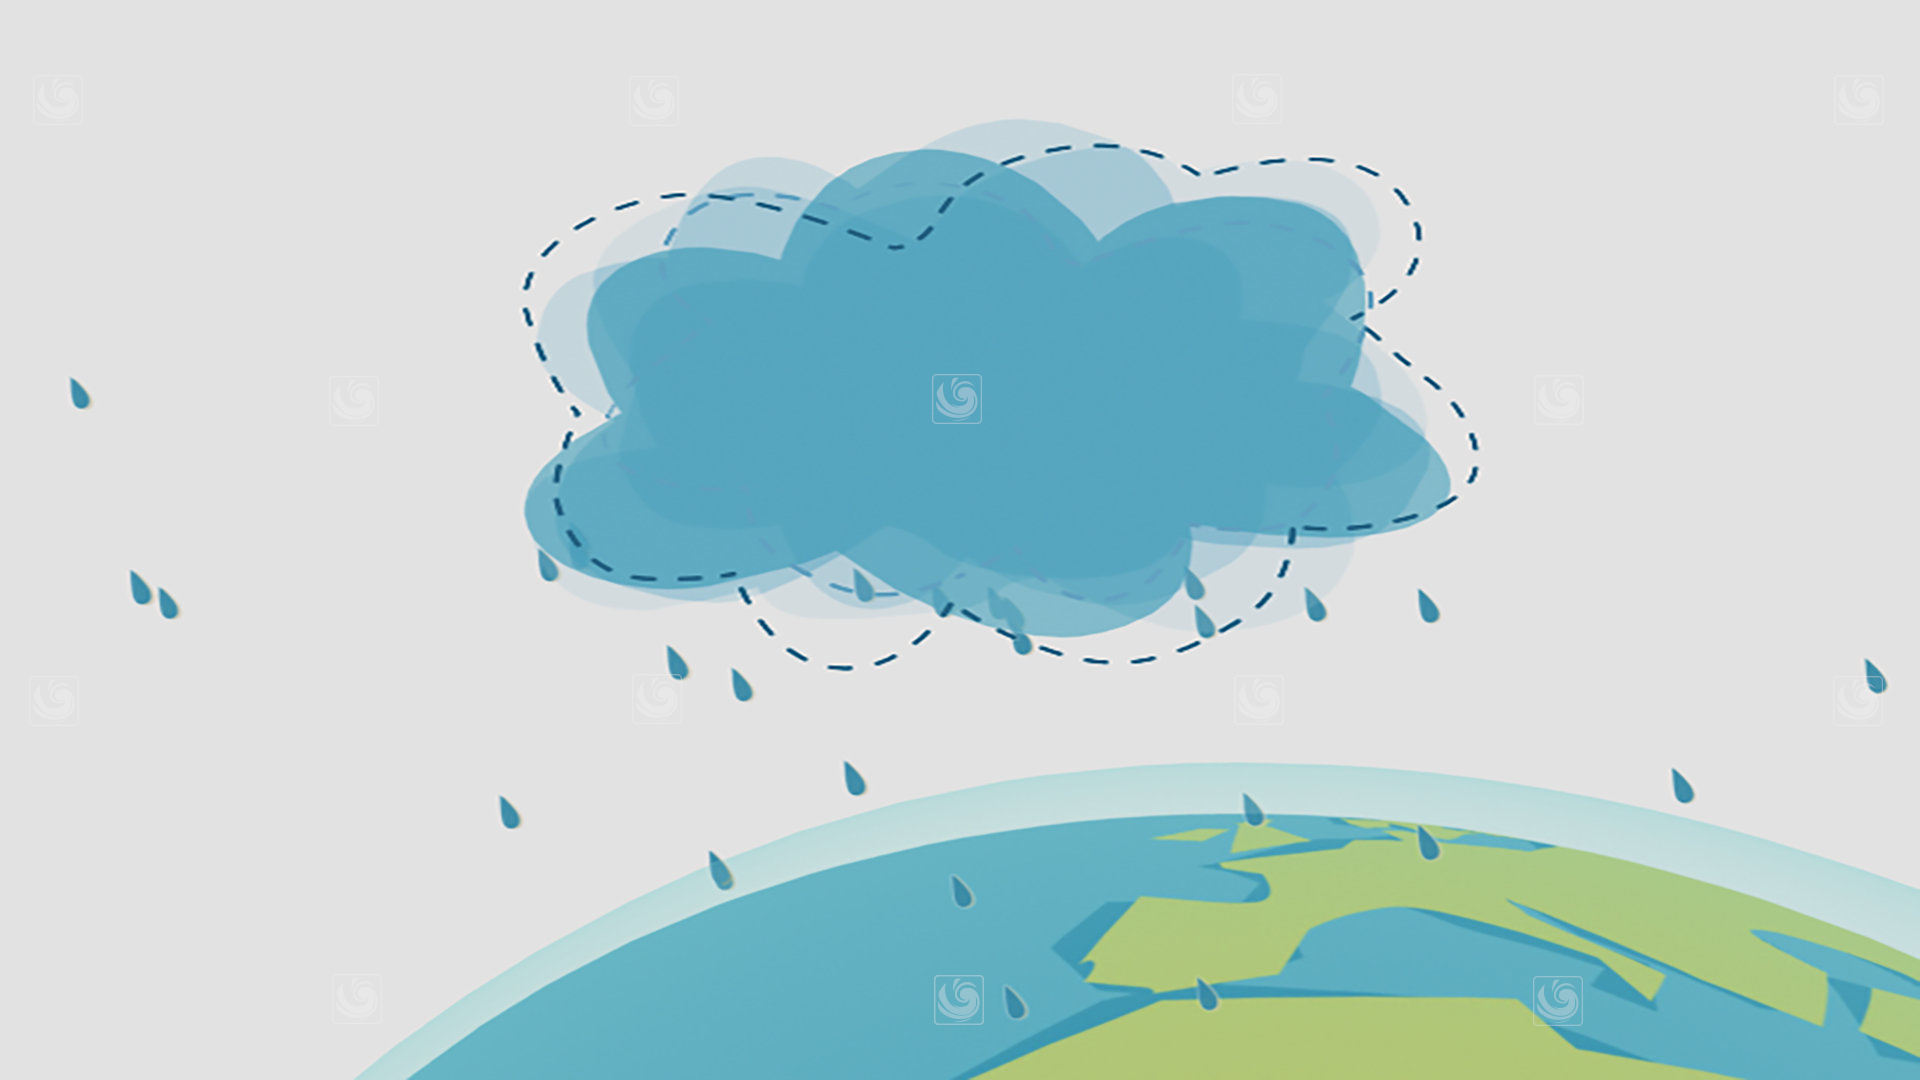 2D animation frame showing how rainwater falls from the clouds